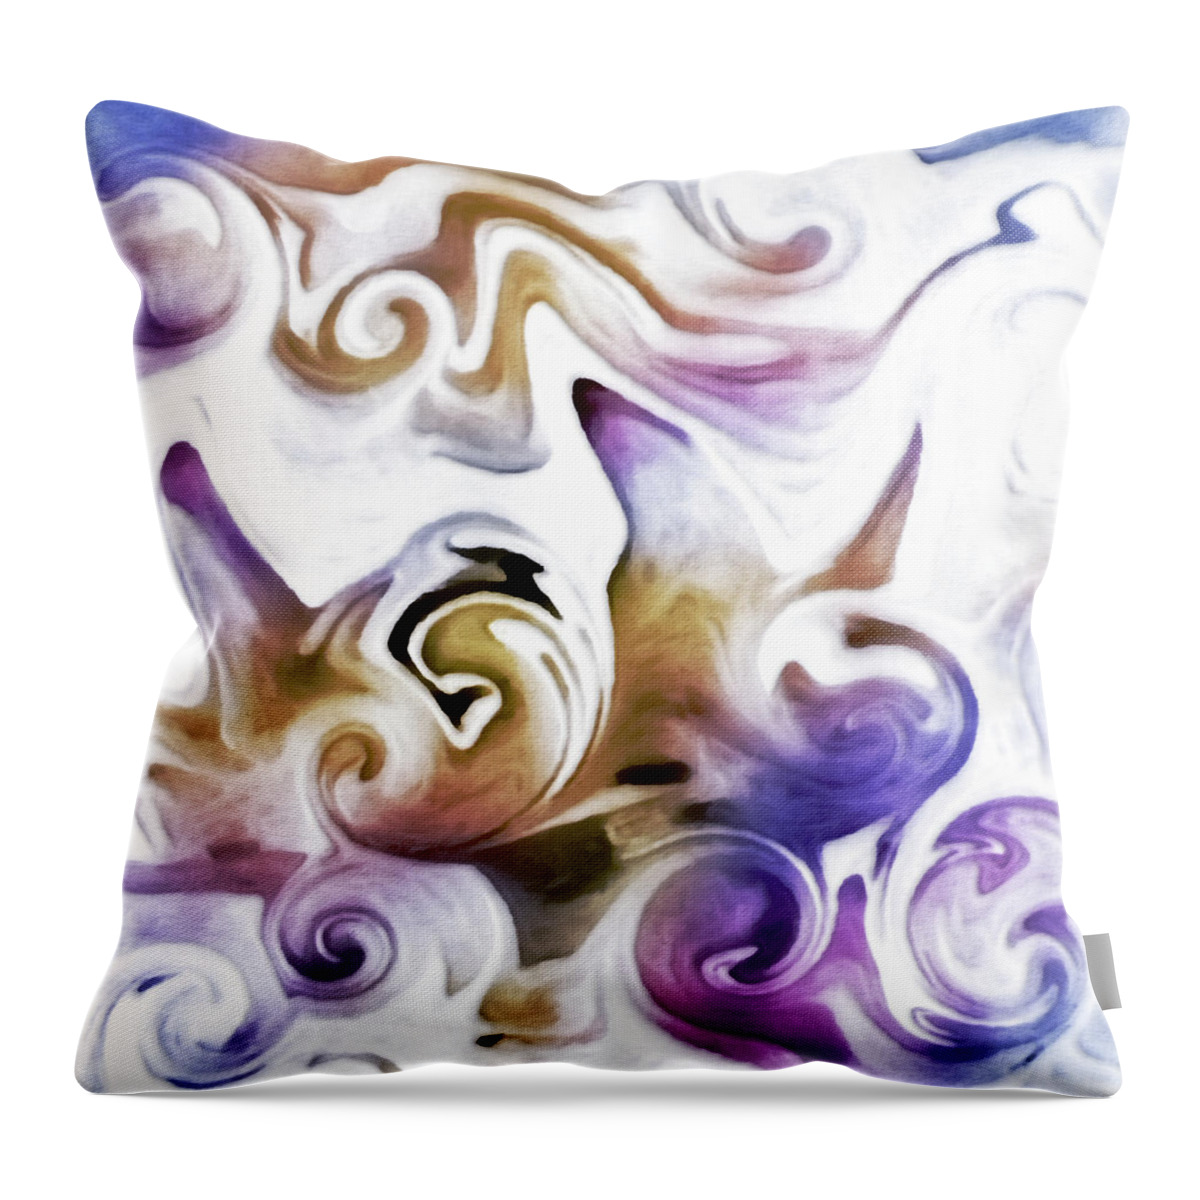 Abstract Throw Pillow featuring the digital art Clouded Dreams by DiDesigns Graphics